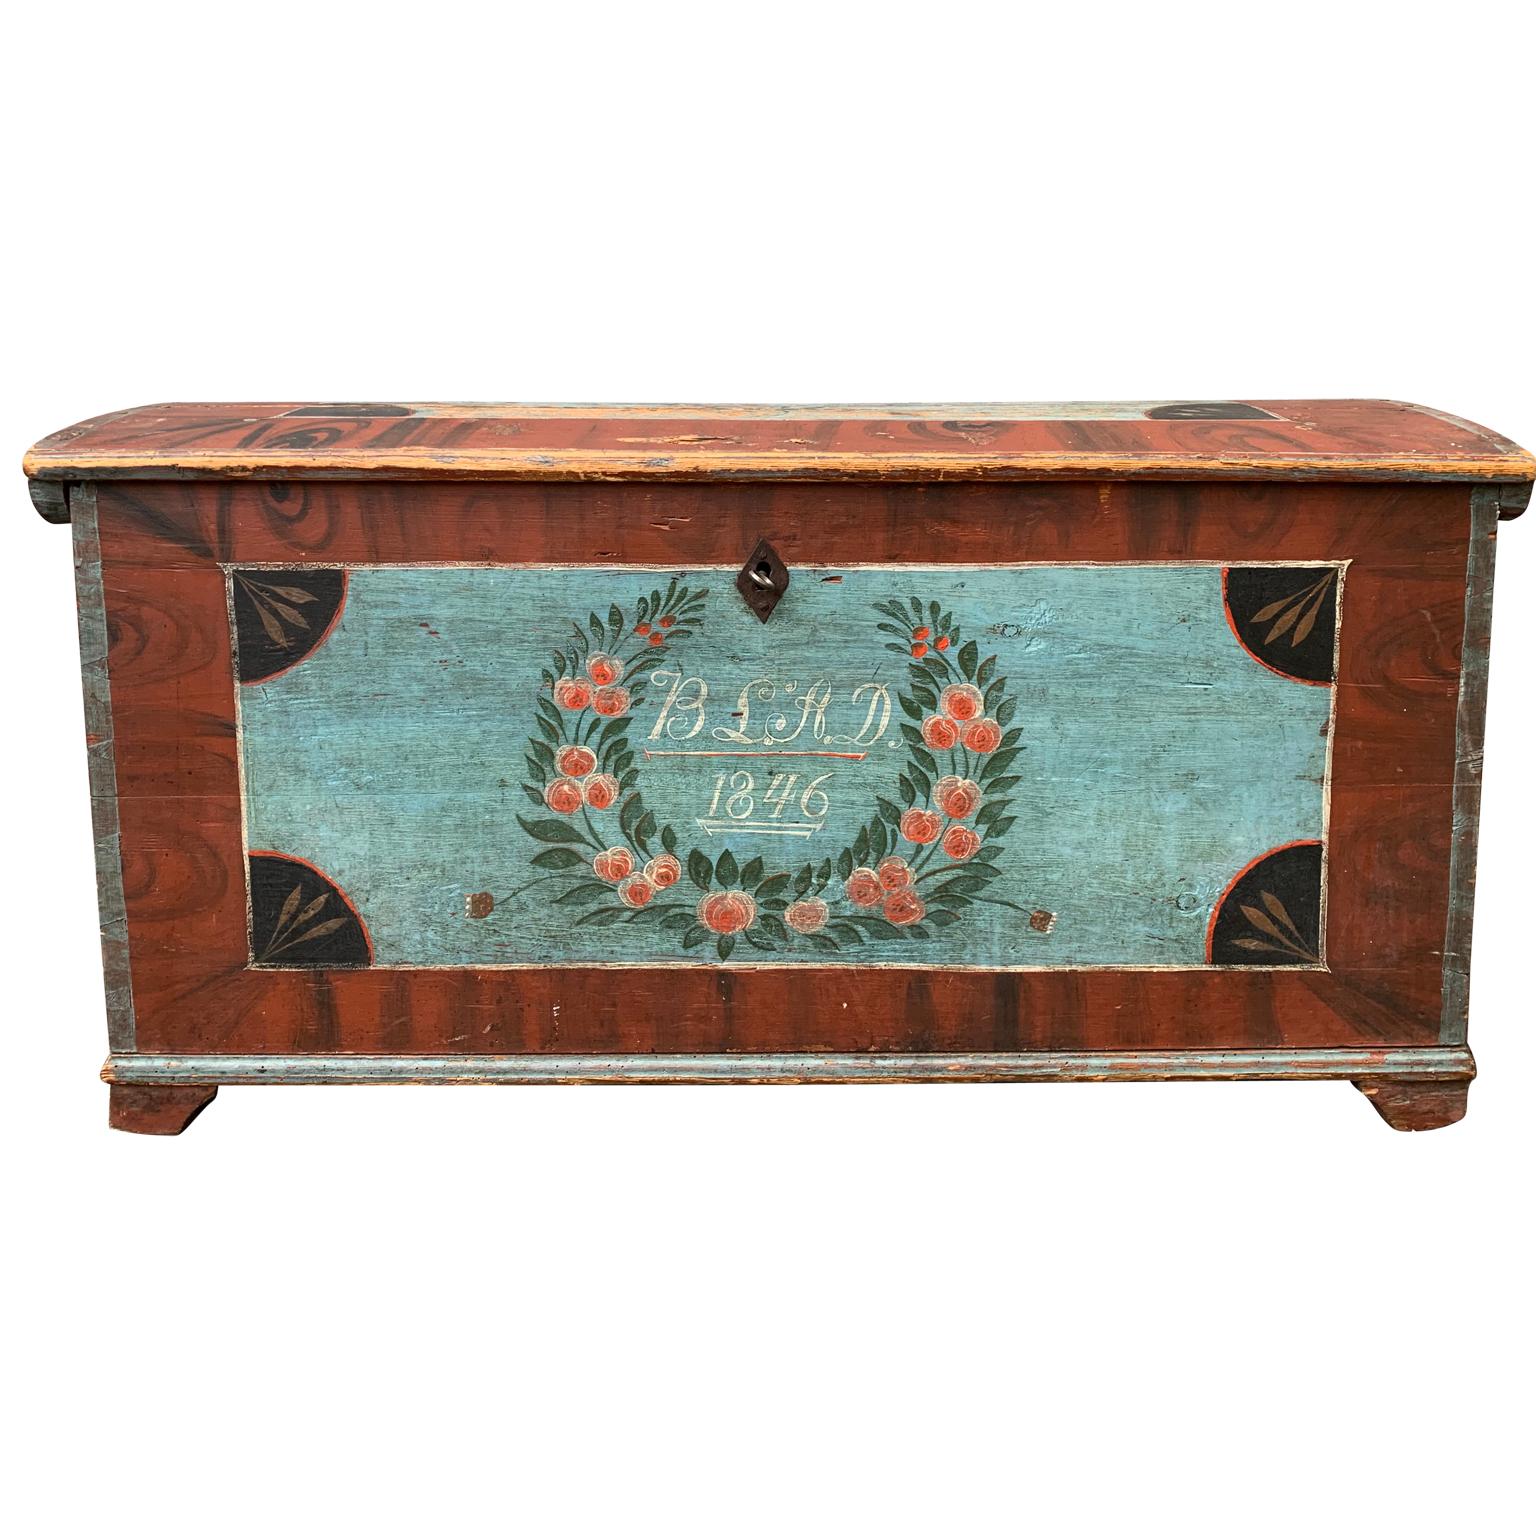 An original painted dome-top trunk from South Sweden, dated 1846. It has the initial of the father of the wife to be 